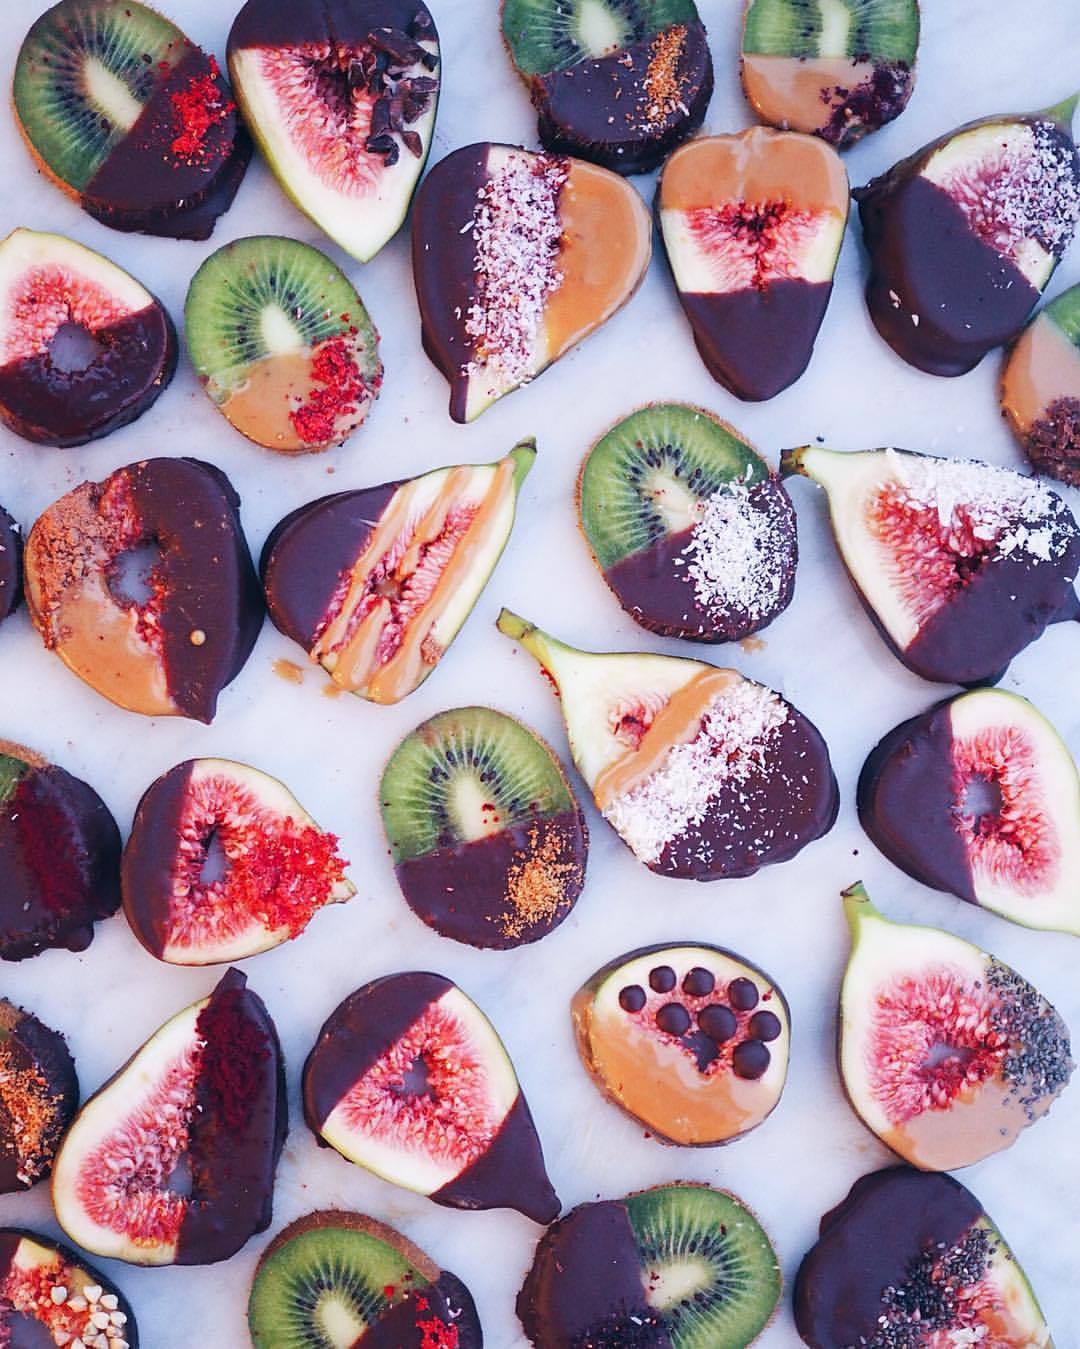 letscookvegan:
“ Choc Covered Kiwis and Figs by @talinegabriel 💖
”